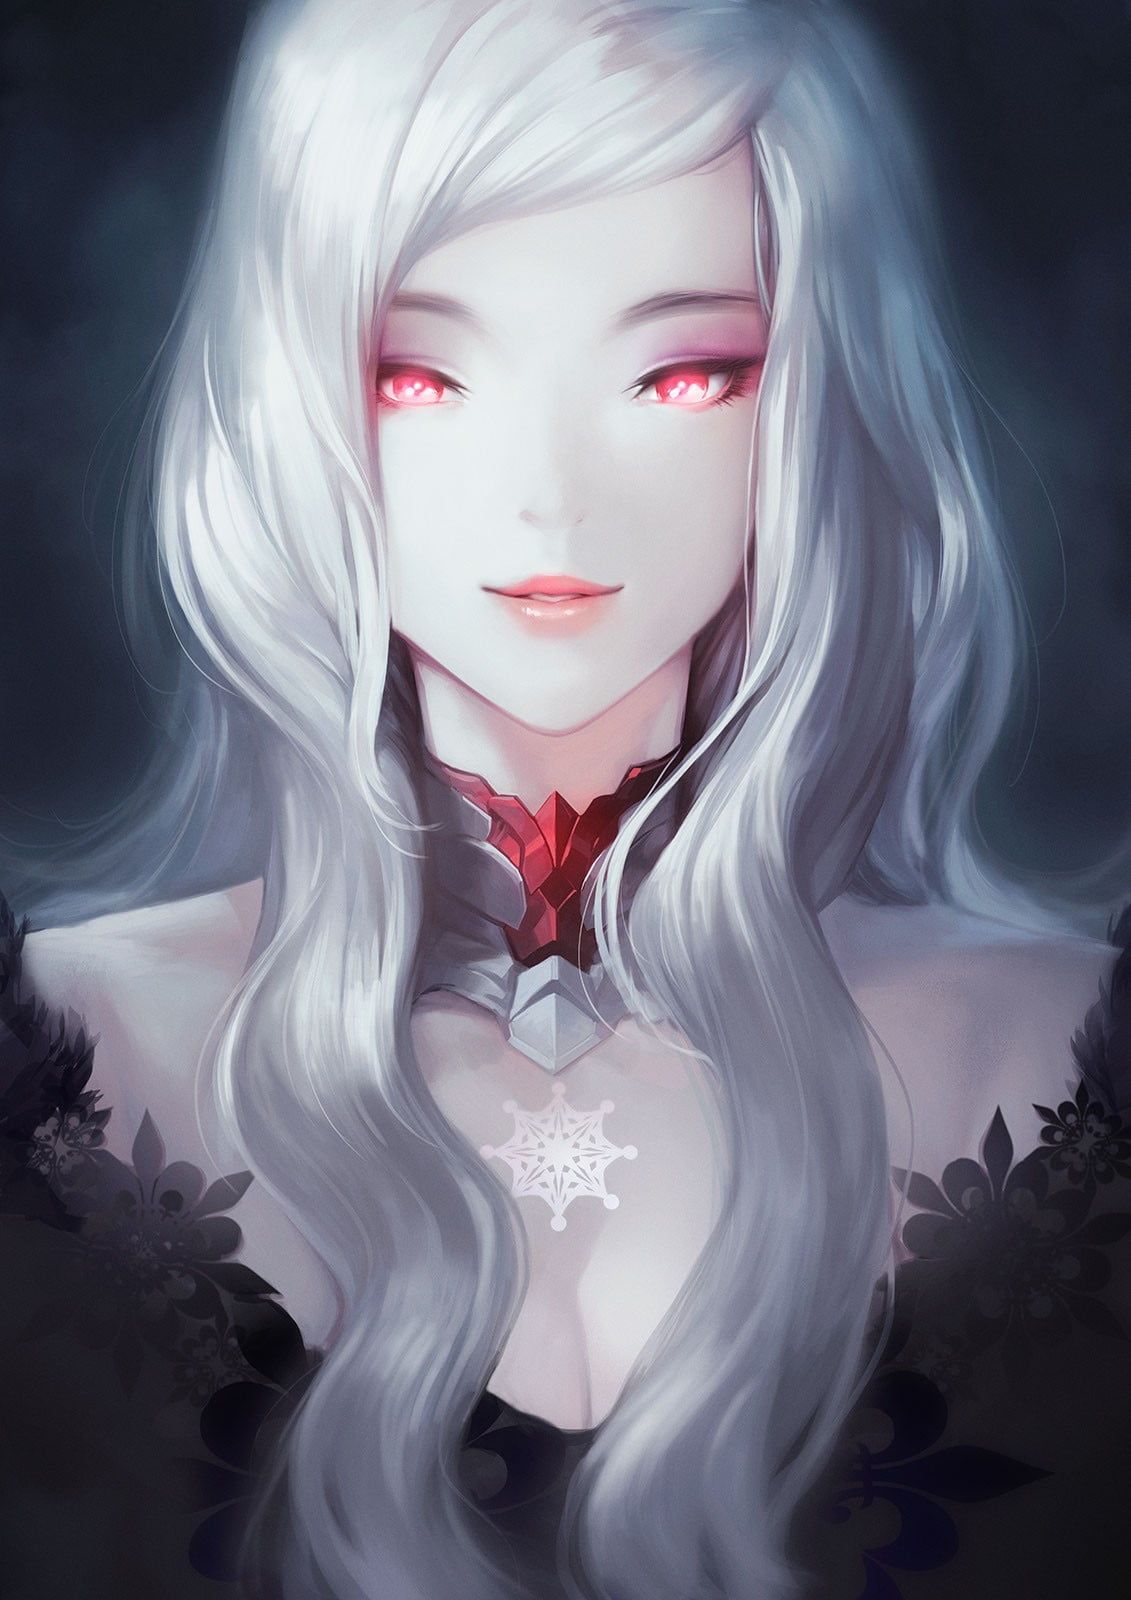 Gray haired female anime character, red eyes, white hair, portrait.